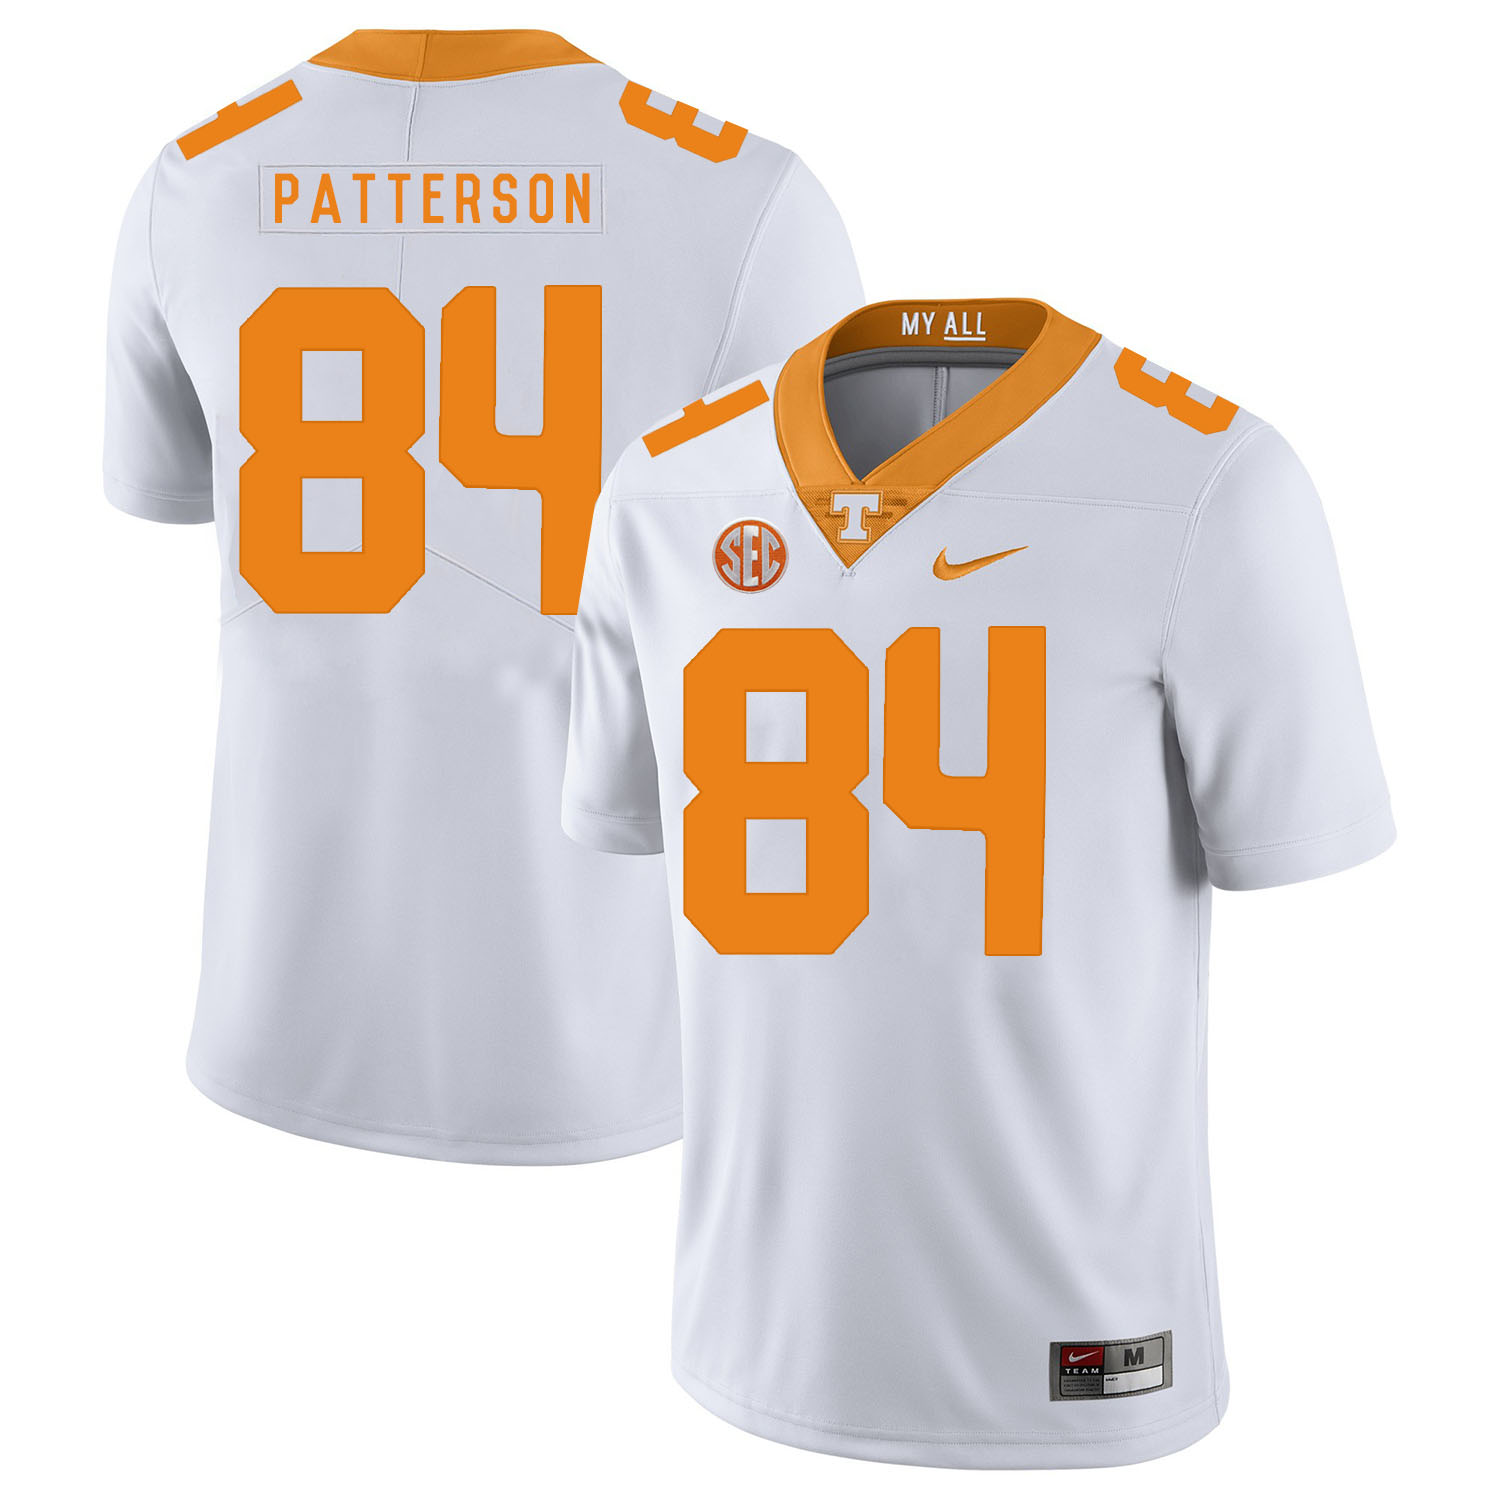 Tennessee Volunteers 84 Cordarrelle Patterson White Nike College Football Jersey